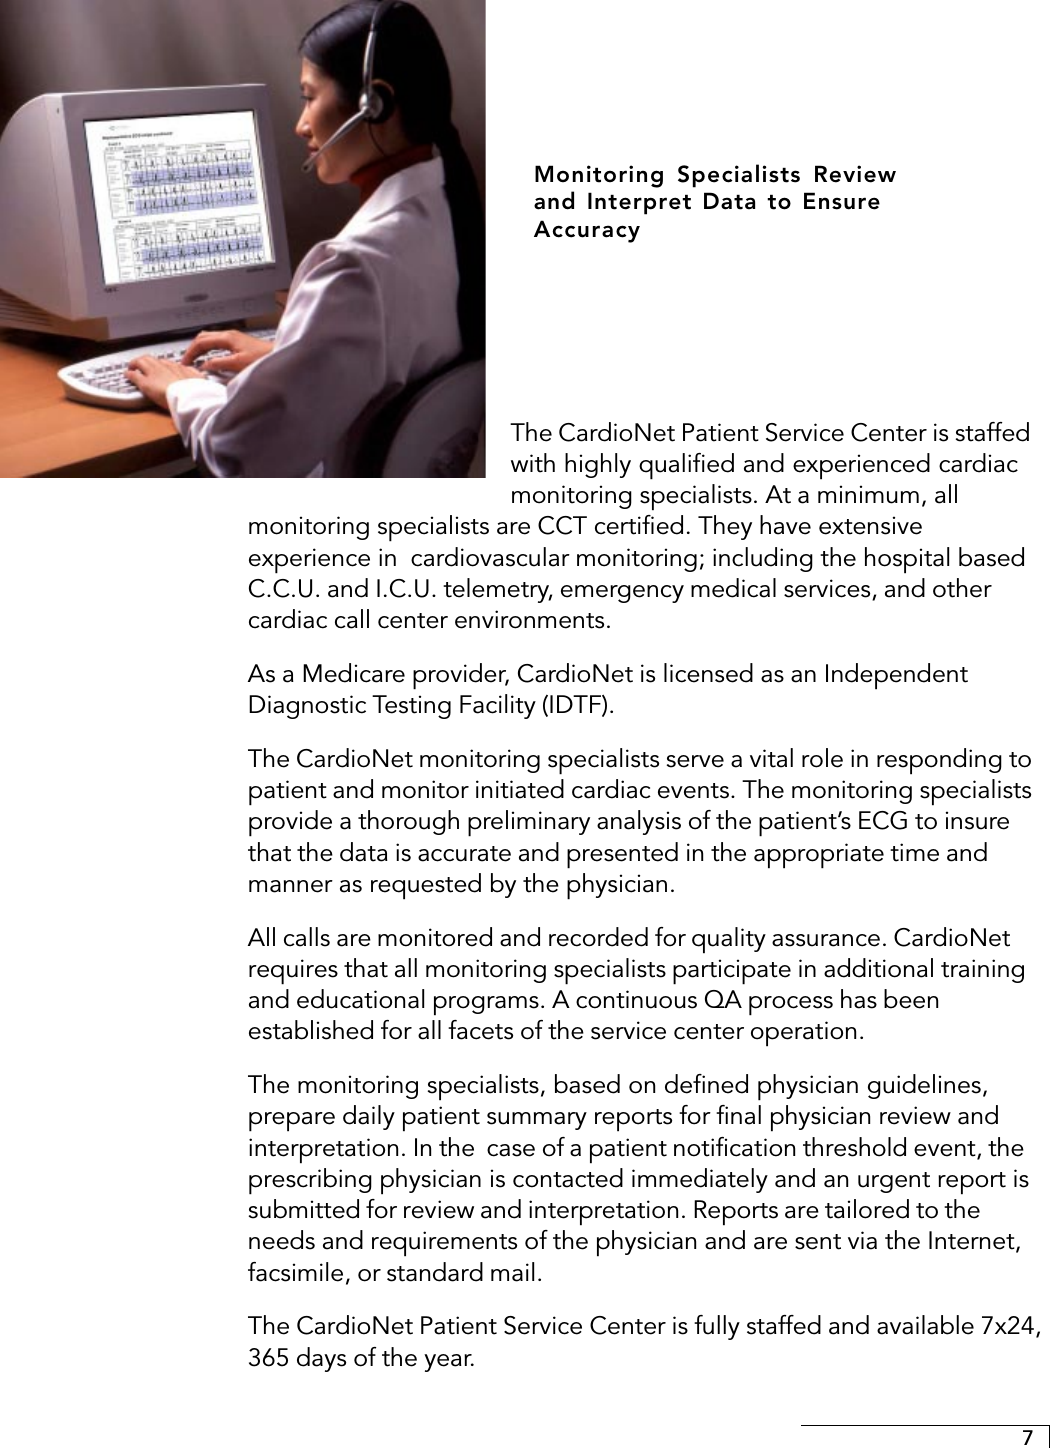 7The CardioNet Patient Service Center is staffedwith highly qualified and experienced cardiacmonitoring specialists. At a minimum, allmonitoring specialists are CCT certified. They have extensiveexperience in  cardiovascular monitoring; including the hospital basedC.C.U. and I.C.U. telemetry, emergency medical services, and othercardiac call center environments.As a Medicare provider, CardioNet is licensed as an IndependentDiagnostic Testing Facility (IDTF).The CardioNet monitoring specialists serve a vital role in responding topatient and monitor initiated cardiac events. The monitoring specialistsprovide a thorough preliminary analysis of the patient’s ECG to insurethat the data is accurate and presented in the appropriate time andmanner as requested by the physician.All calls are monitored and recorded for quality assurance. CardioNetrequires that all monitoring specialists participate in additional trainingand educational programs. A continuous QA process has beenestablished for all facets of the service center operation.The monitoring specialists, based on defined physician guidelines,prepare daily patient summary reports for final physician review andinterpretation. In the  case of a patient notification threshold event, theprescribing physician is contacted immediately and an urgent report issubmitted for review and interpretation. Reports are tailored to theneeds and requirements of the physician and are sent via the Internet,facsimile, or standard mail.The CardioNet Patient Service Center is fully staffed and available 7x24,365 days of the year.Monitoring Specialists Reviewand Interpret Data to EnsureAccuracy